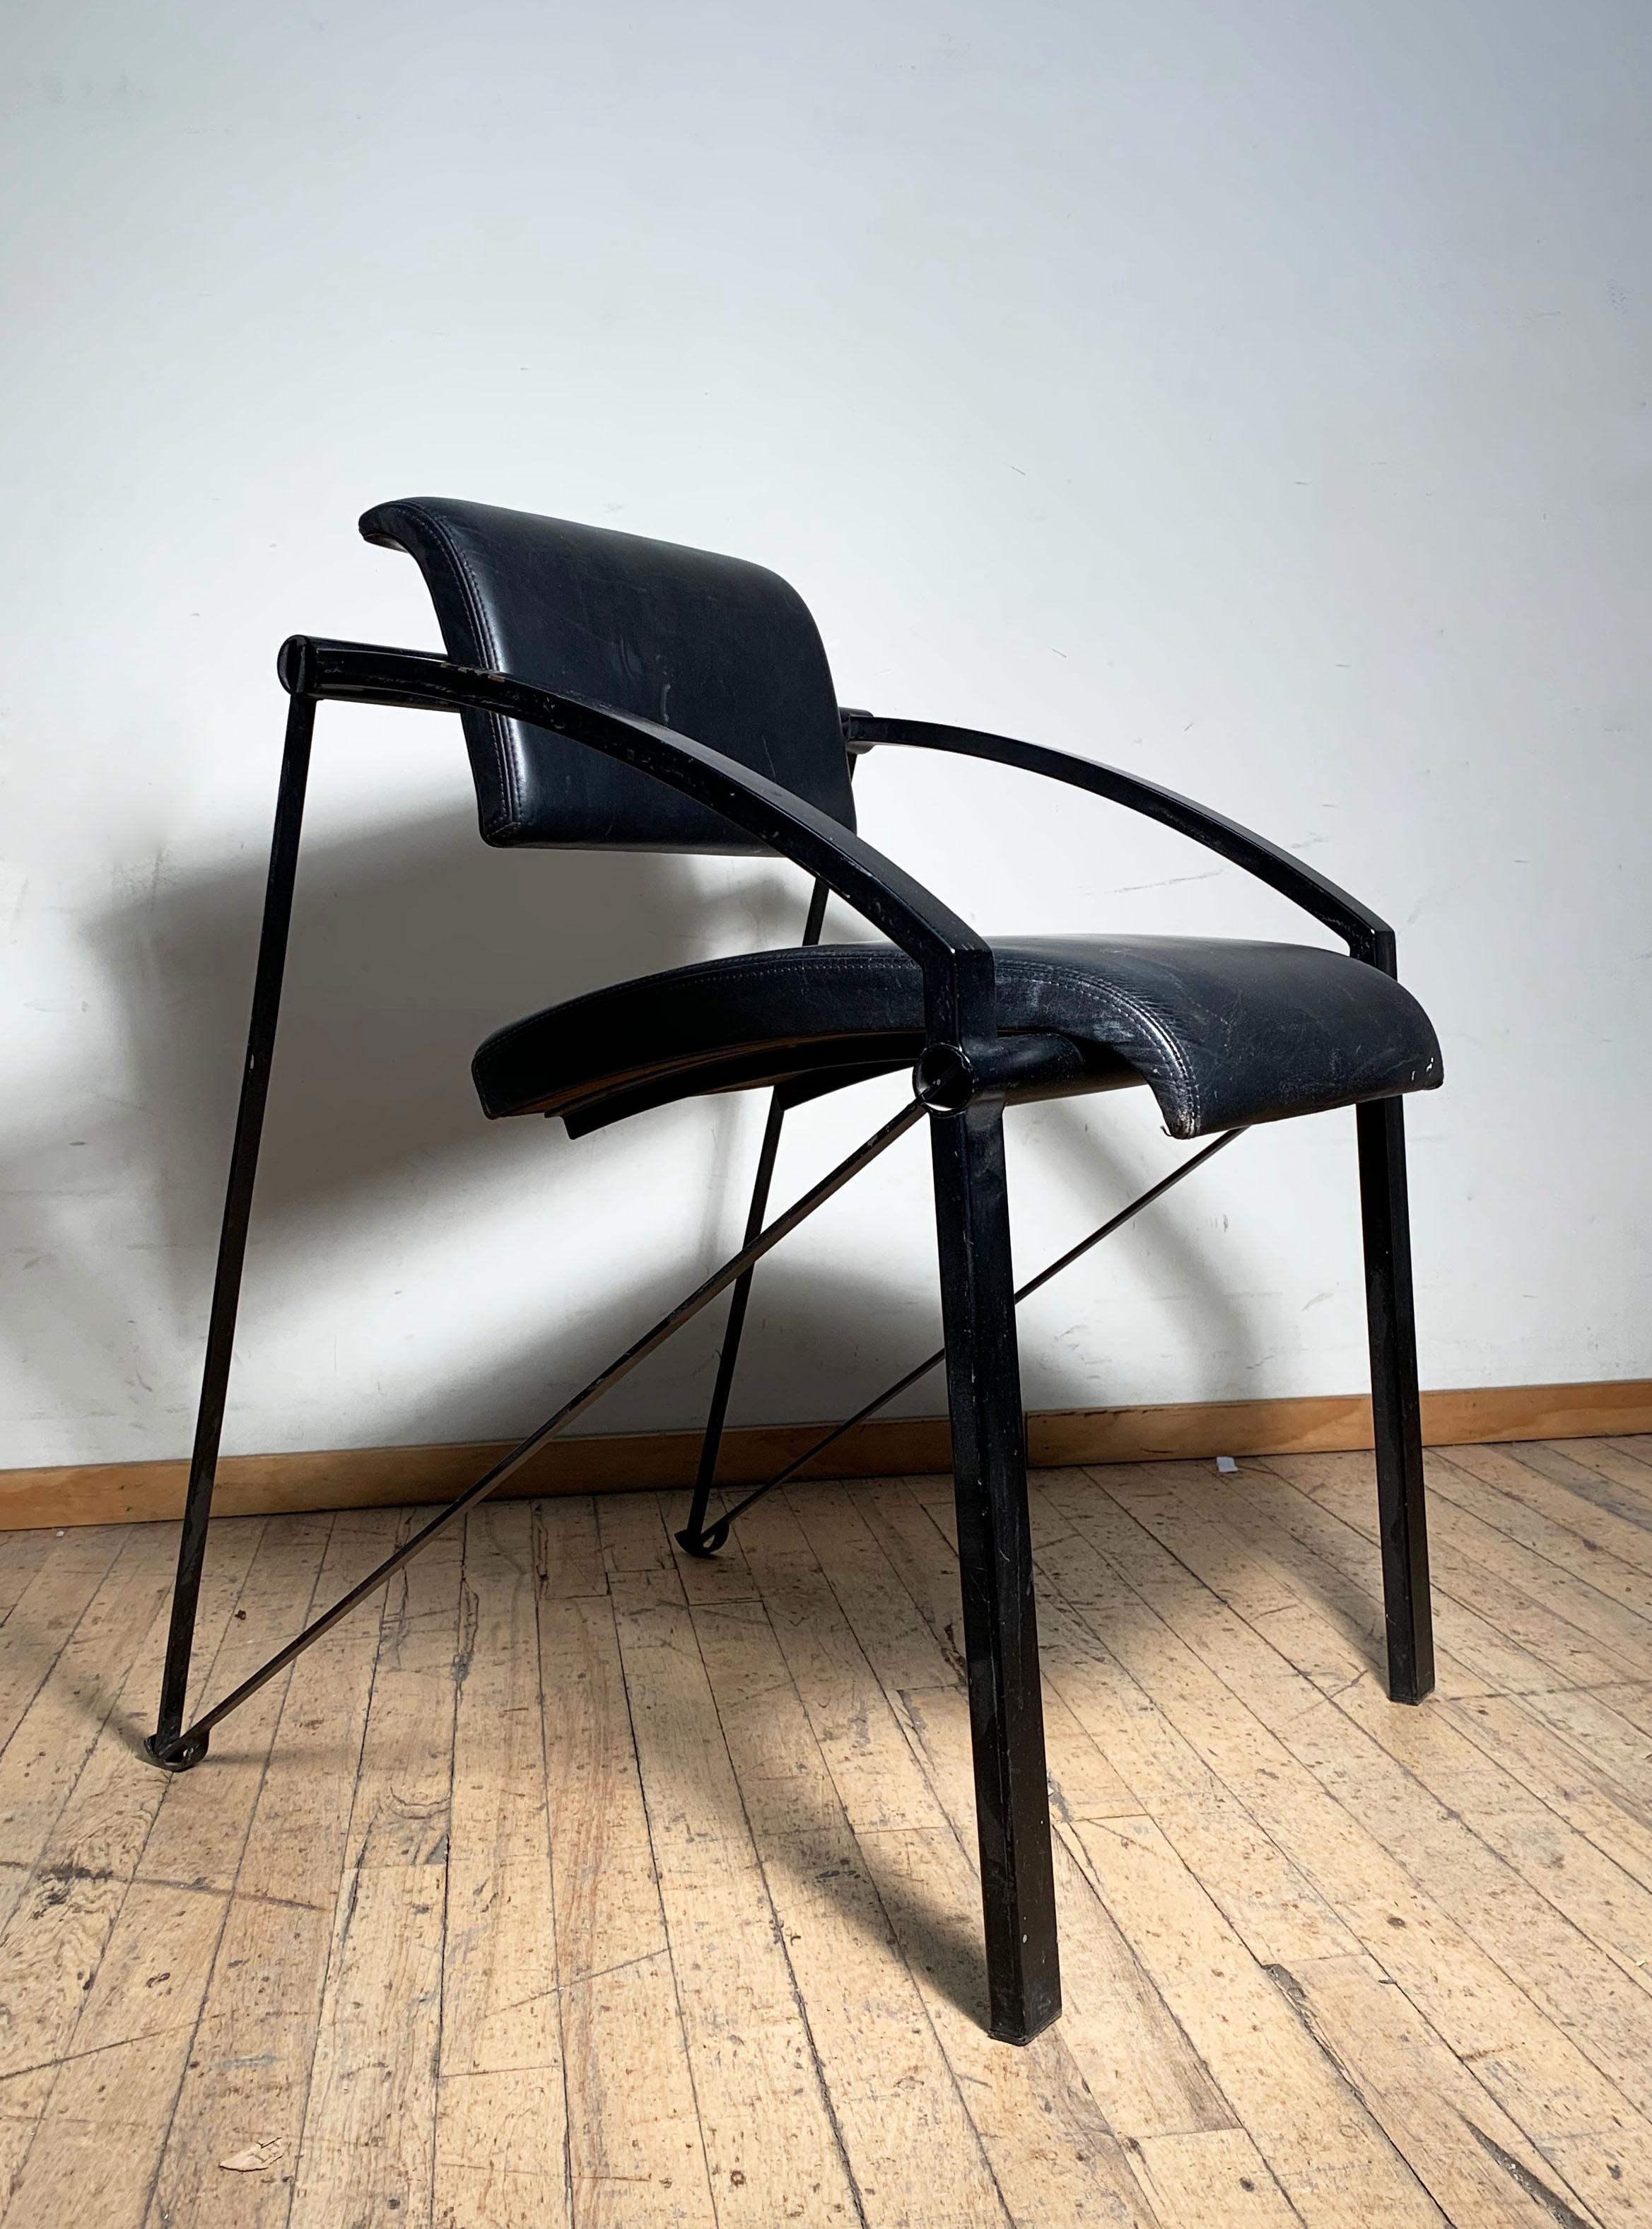 Pair of steel Italian Memphis architectural chairs attributed to Mario Botta. Extreme design with special attention to detail and craftsmanship. Leather seats and Backs. No labels on chairs. 

Total of 4 available.
Unfortunately, the leather was